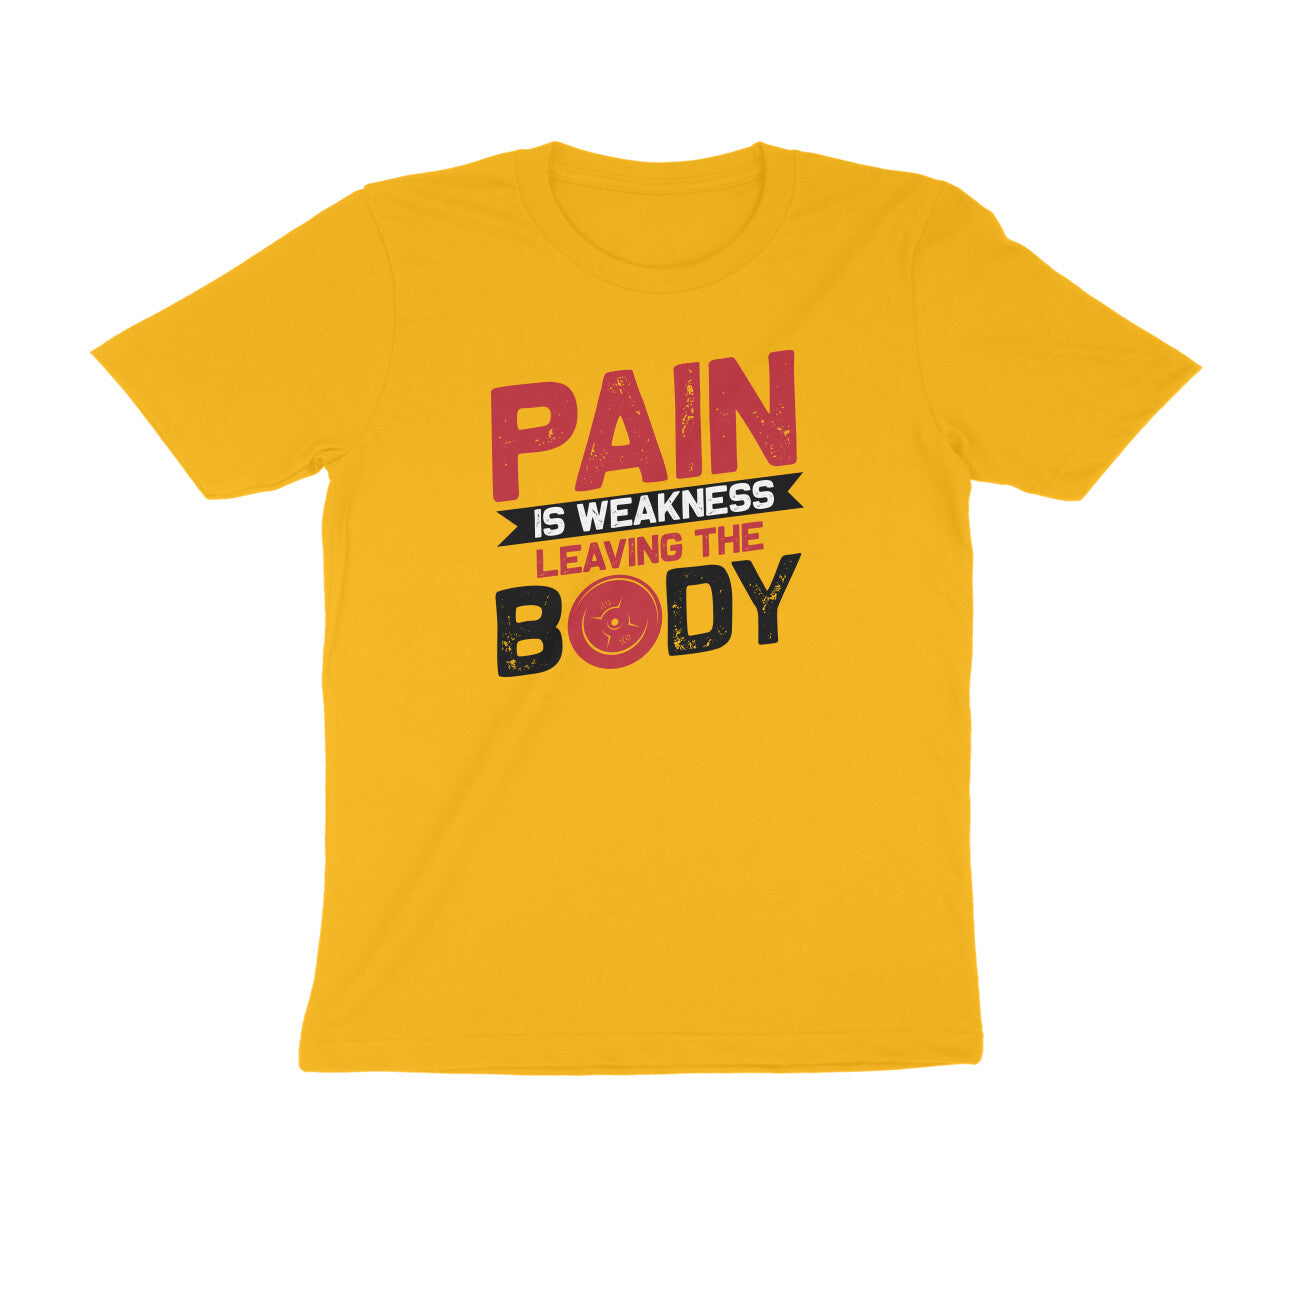 TNH - Men's Round Neck Tshirt - Pain Is Weakness Leaving the Body